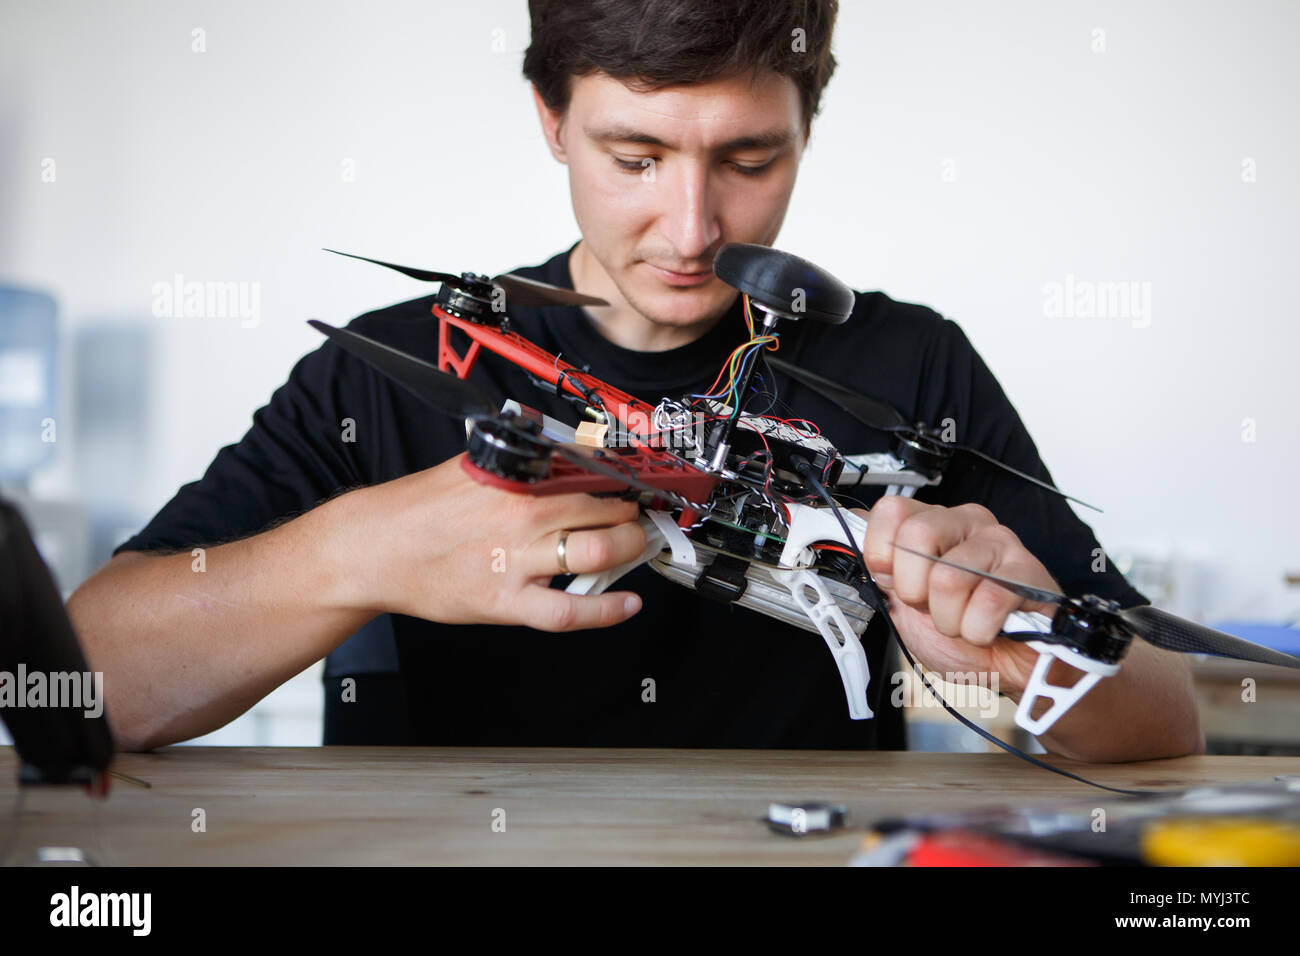 Image of engineer mending square copter at table Stock Photo